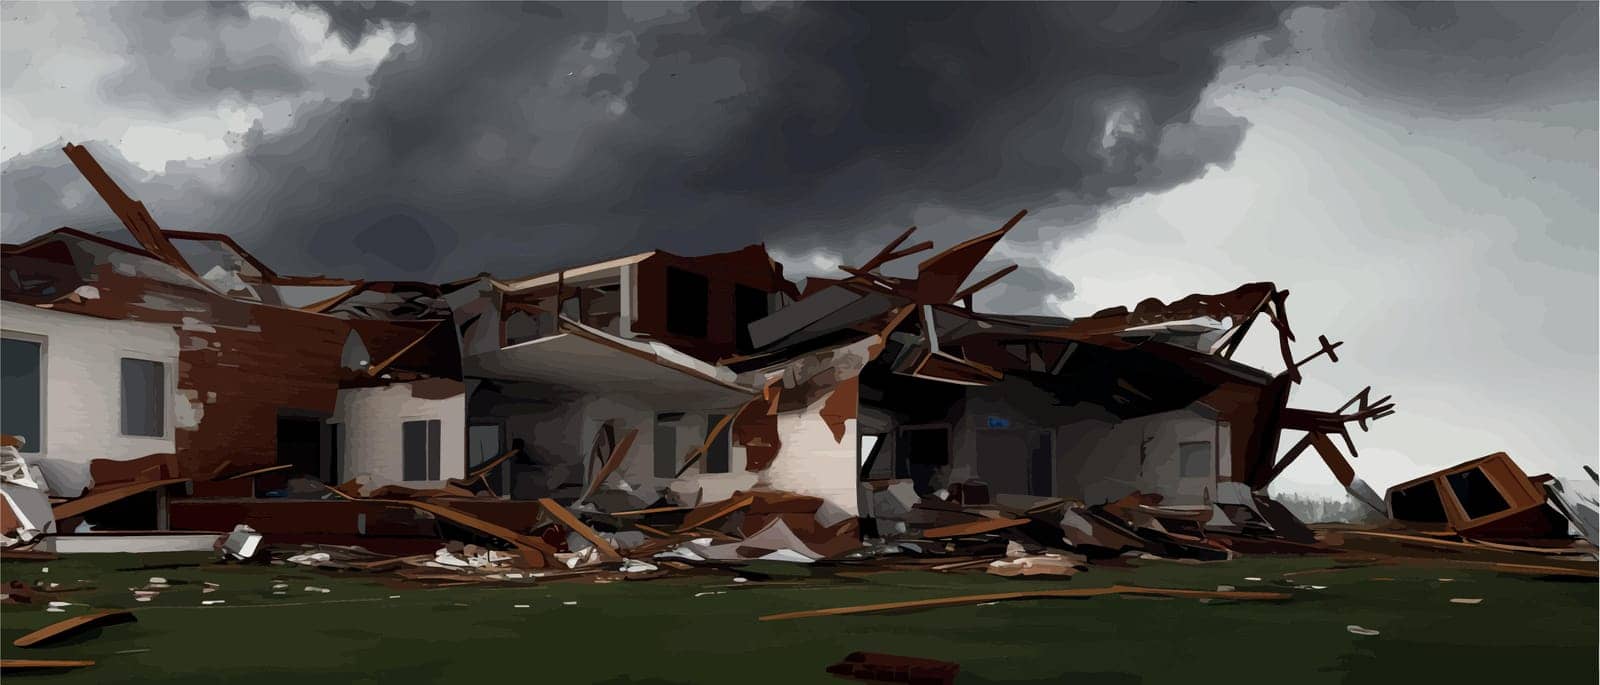 Big storm producing tornado causing destruction, destroyed houses dark sky with storm clouds and rain. Vector illustration.